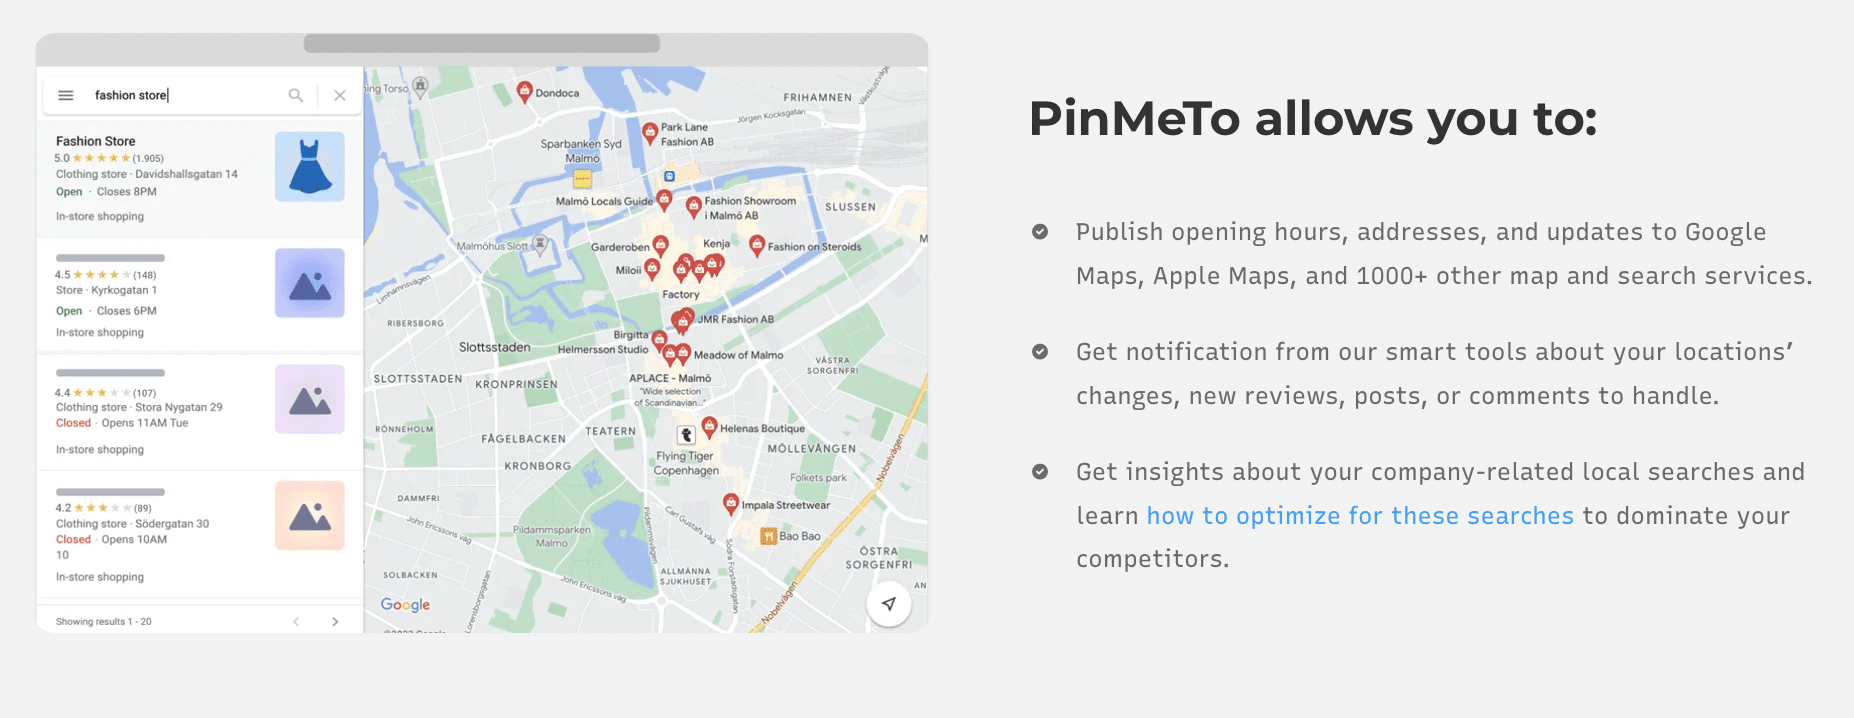 PinMeTo allows you to:

    Publish opening hours, addresses, and updates to Google Maps, Apple Maps, and 1000+ other map and search services.